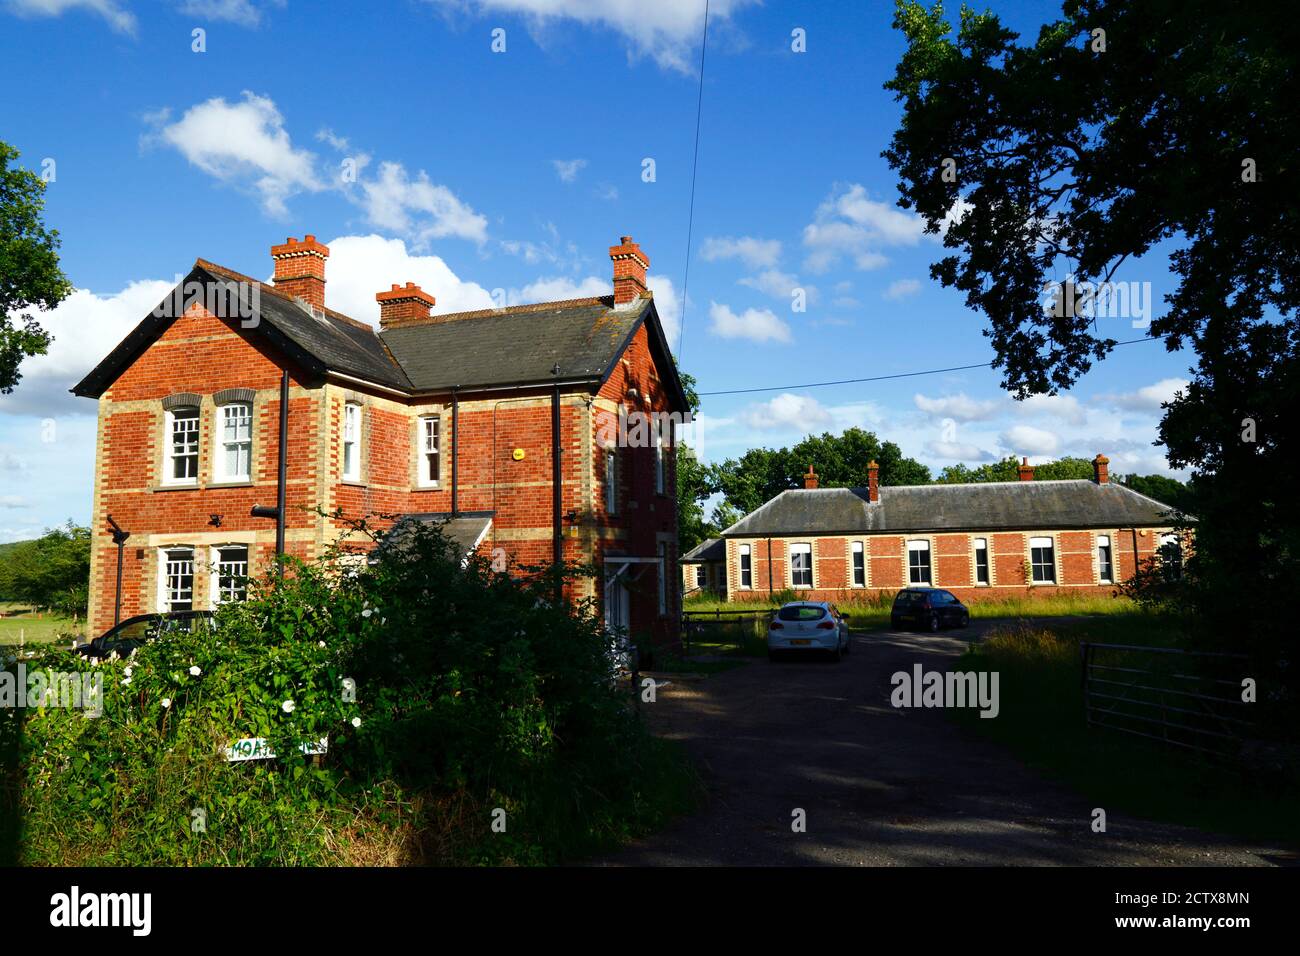 The Doctor's House, a Victorian brick building that was part of a former isolation hospital at Moatenden, Vauxhall Lane, Kent, England Stock Photo